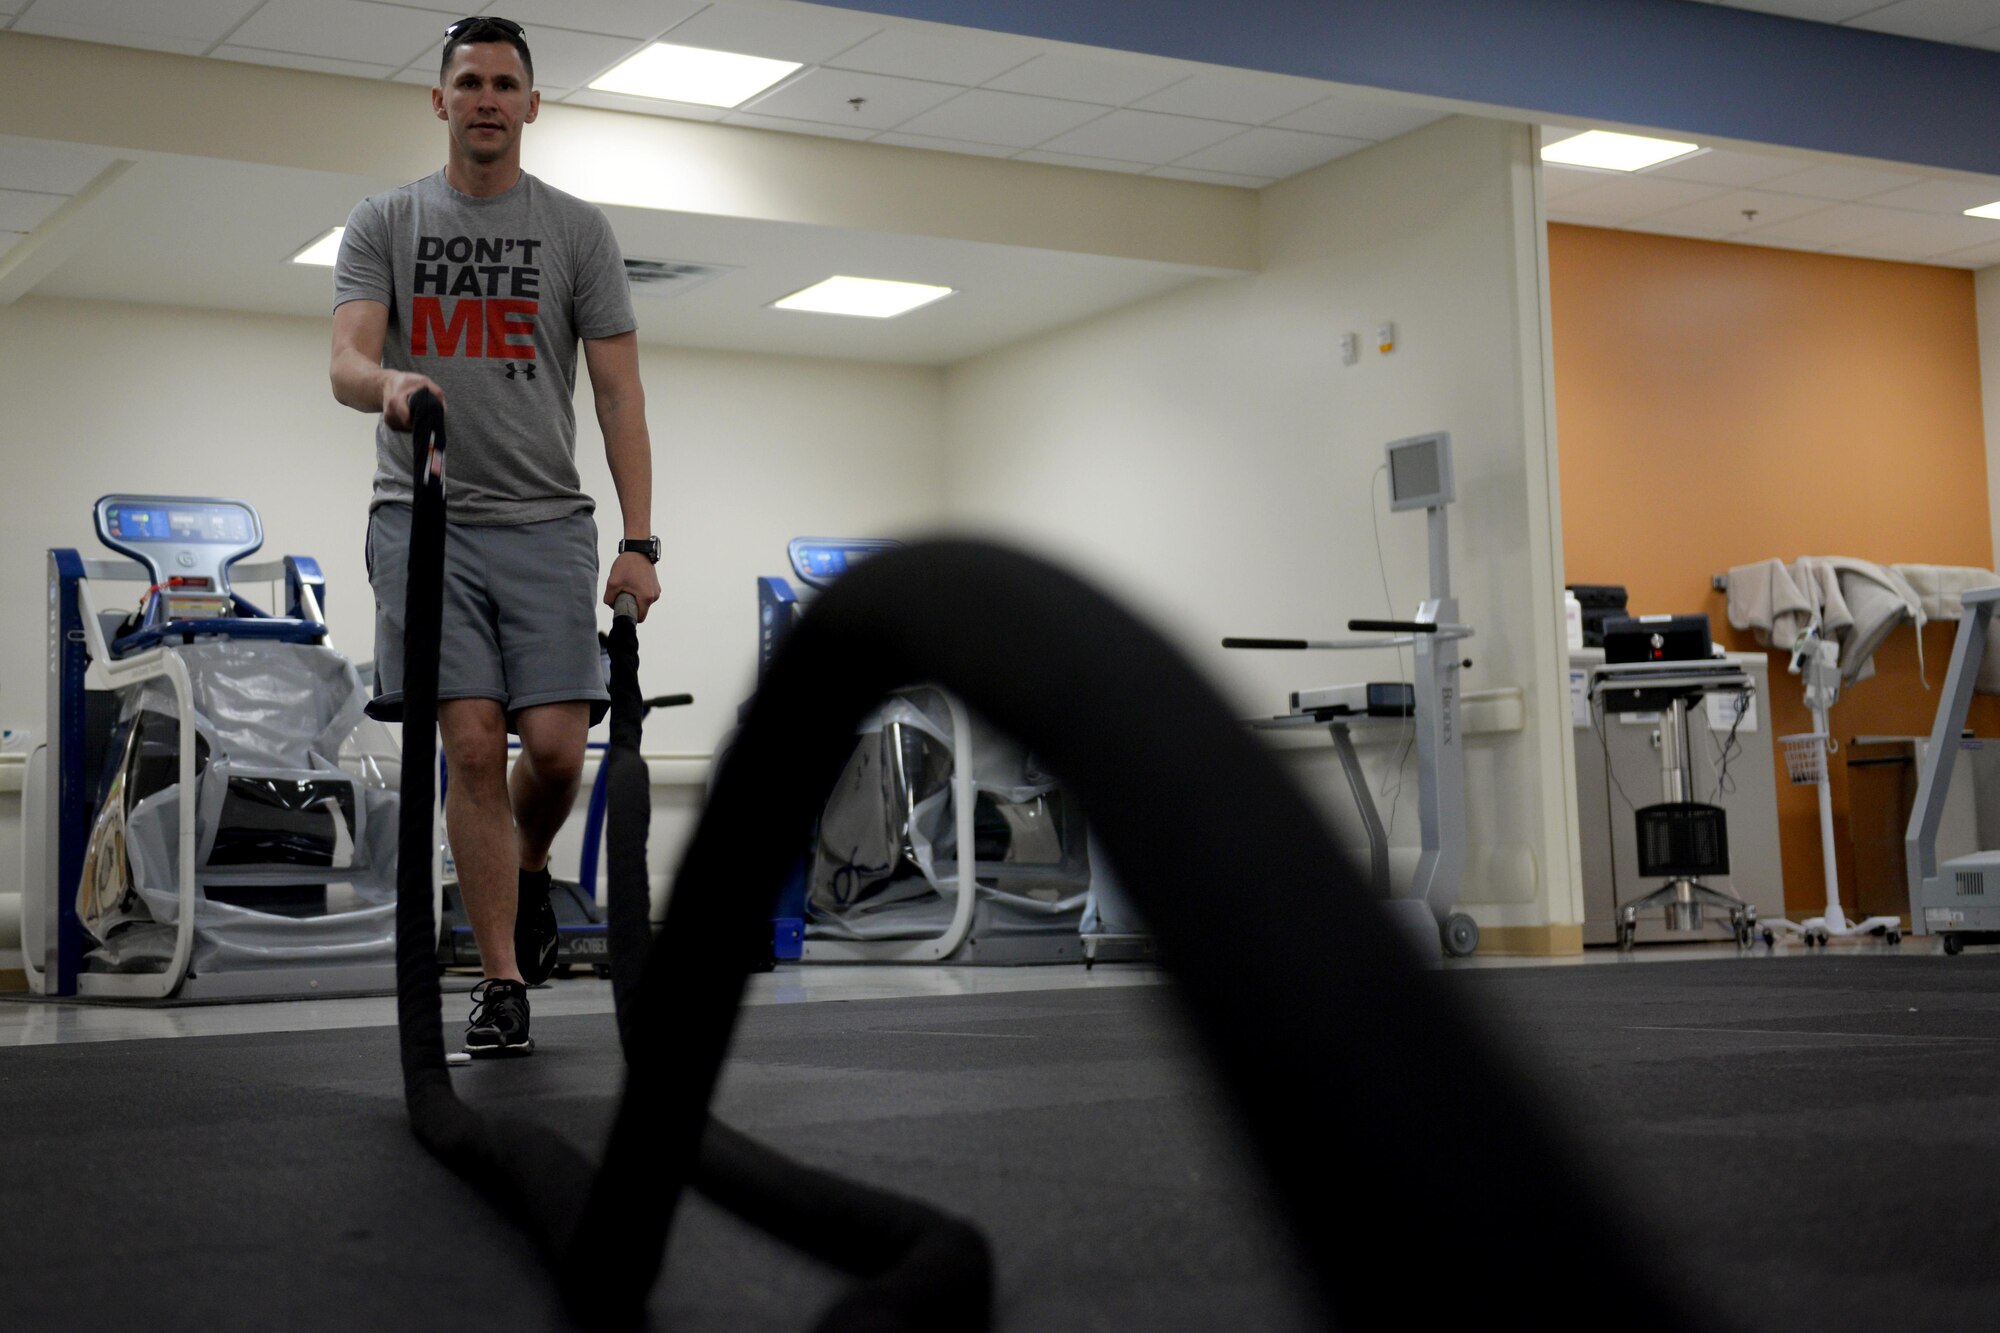 U.S. Marine Corps Staff Sgt. Darien Darland, Keesler Marine Detachment weather instructor, swings battle ropes while balancing on one leg in the physical therapy department, April 7, 2016, Keesler Air Force Base, Miss. When recovering from a leg injury, balancing on one leg can be difficult. As clients progress in their therapy, technicians increase exercise difficulty. Incorporating battle ropes into a single leg stability exercise adds an extra challenge to the client. (Air Force Photo by Airman 1st Class Travis Beihl)